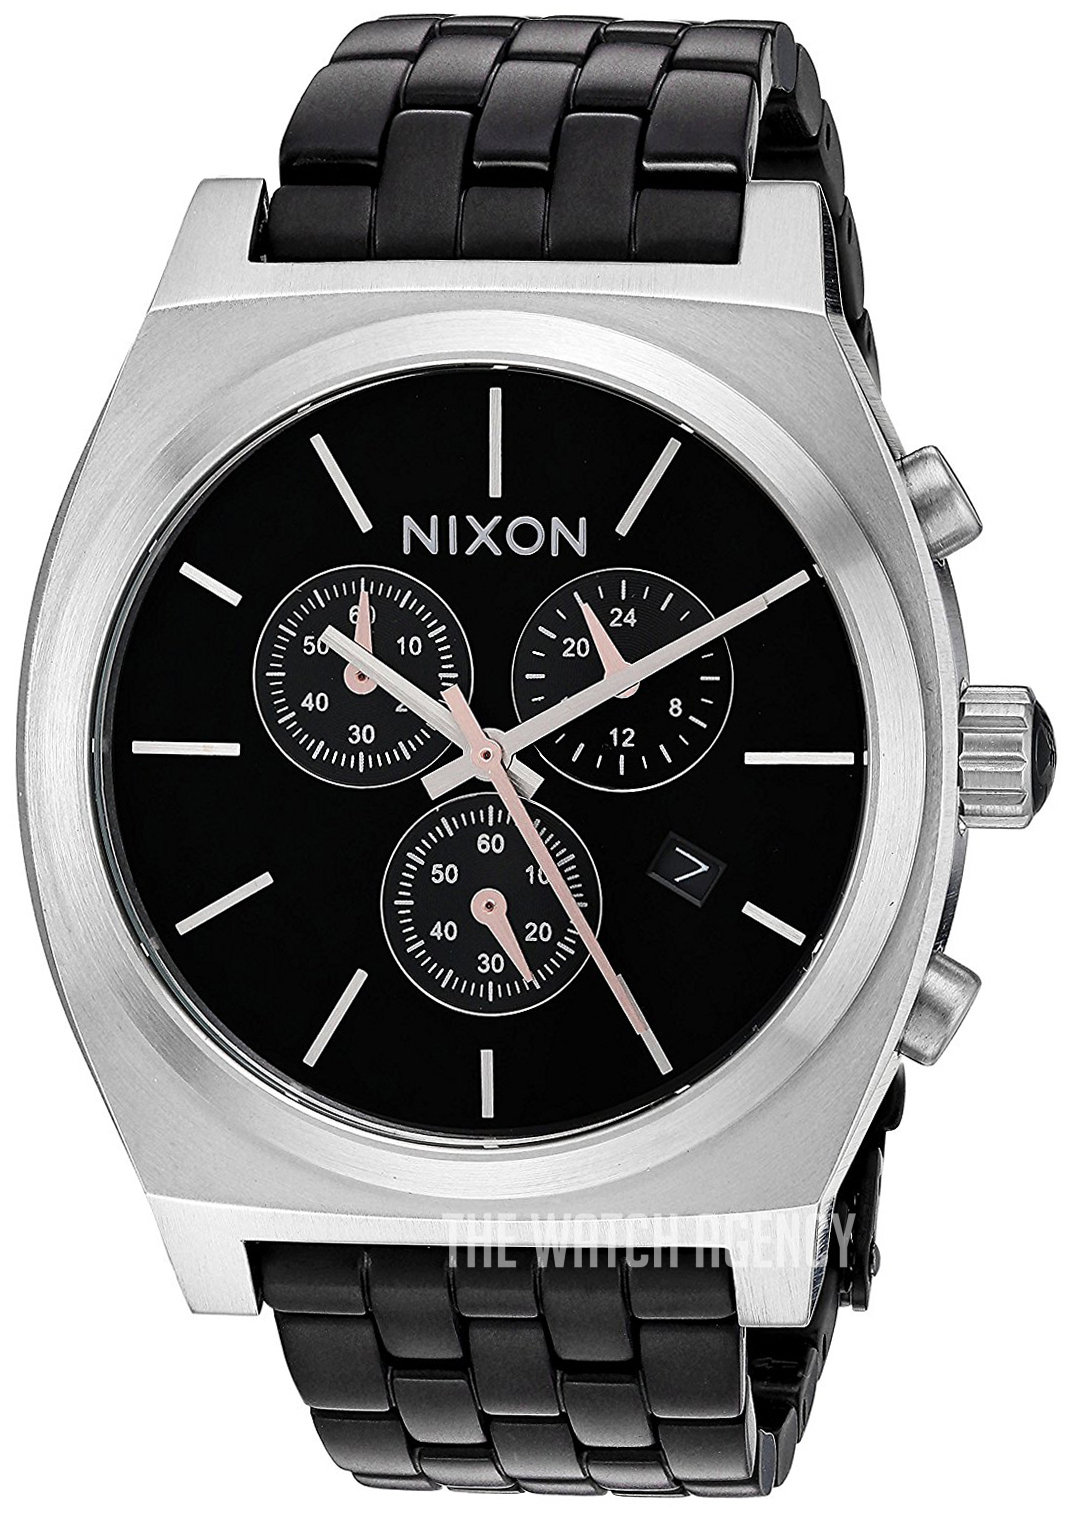 A9722541-00 Nixon The Time Teller | TheWatchAgency™